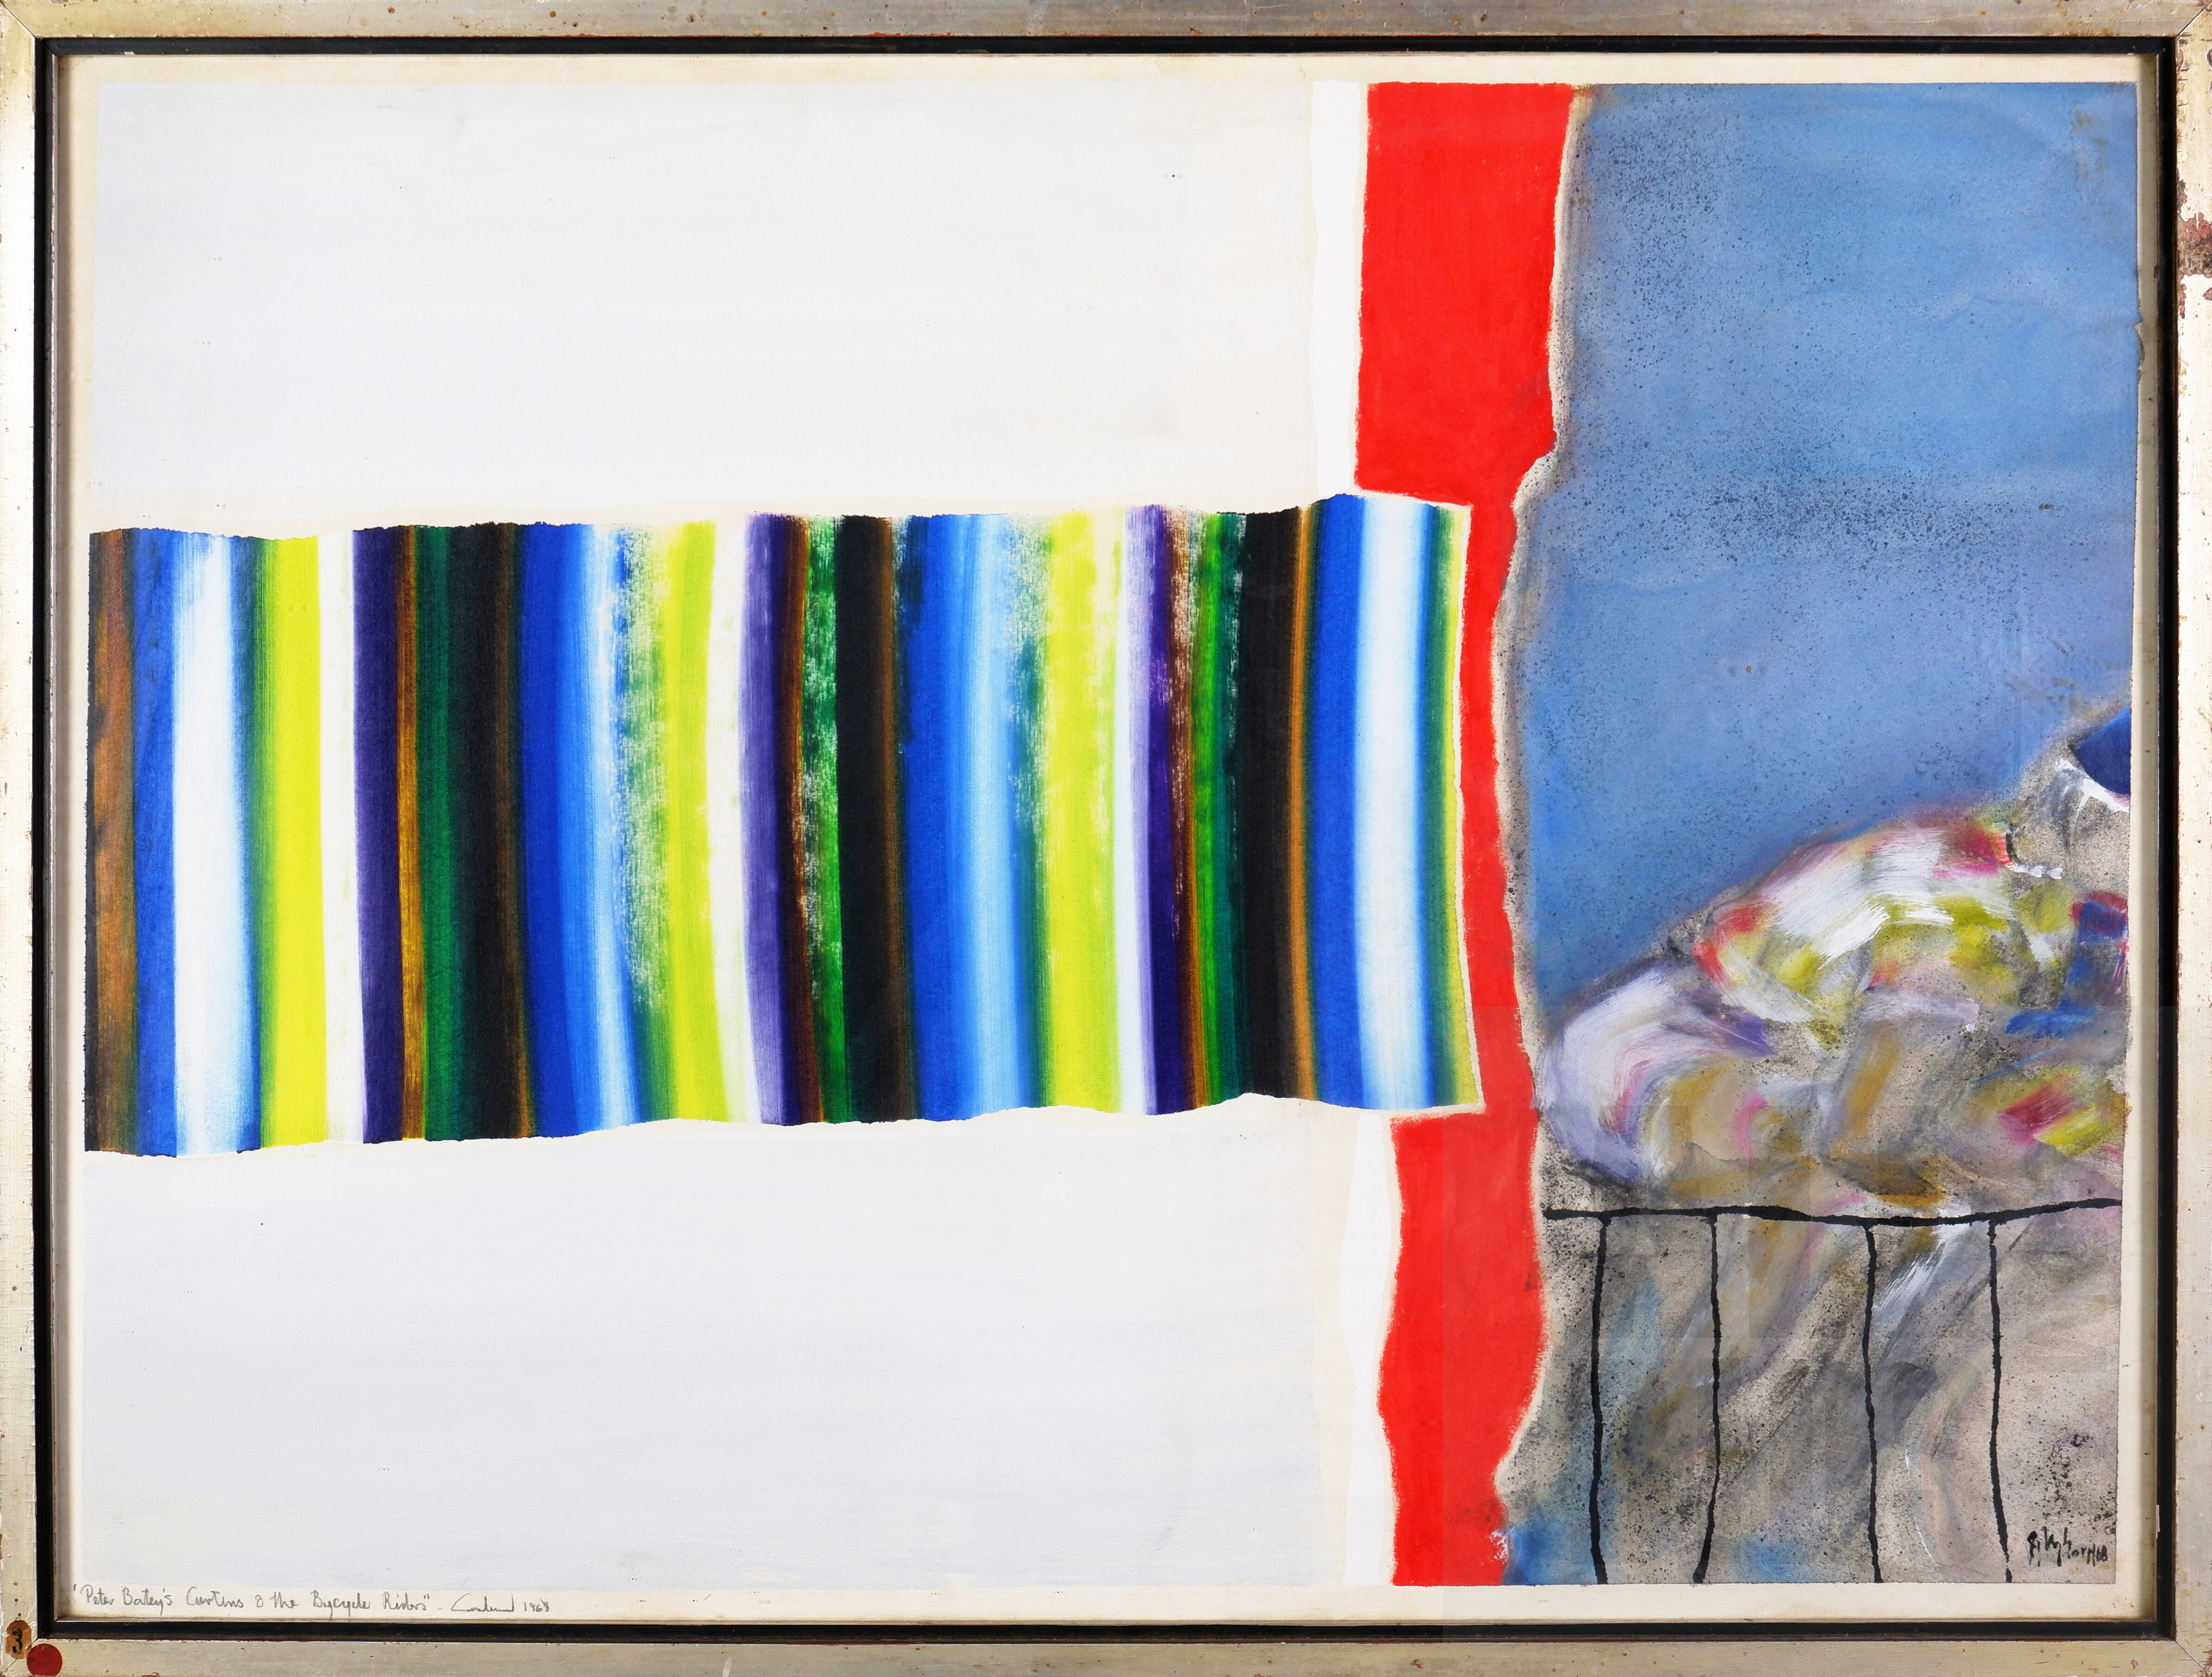 'Thomas Gleghorn (born 1925), Peter Bateys Curtains and the Bicycle Riders 1968, Mixed Media on Paper, 54 x 74 cm'